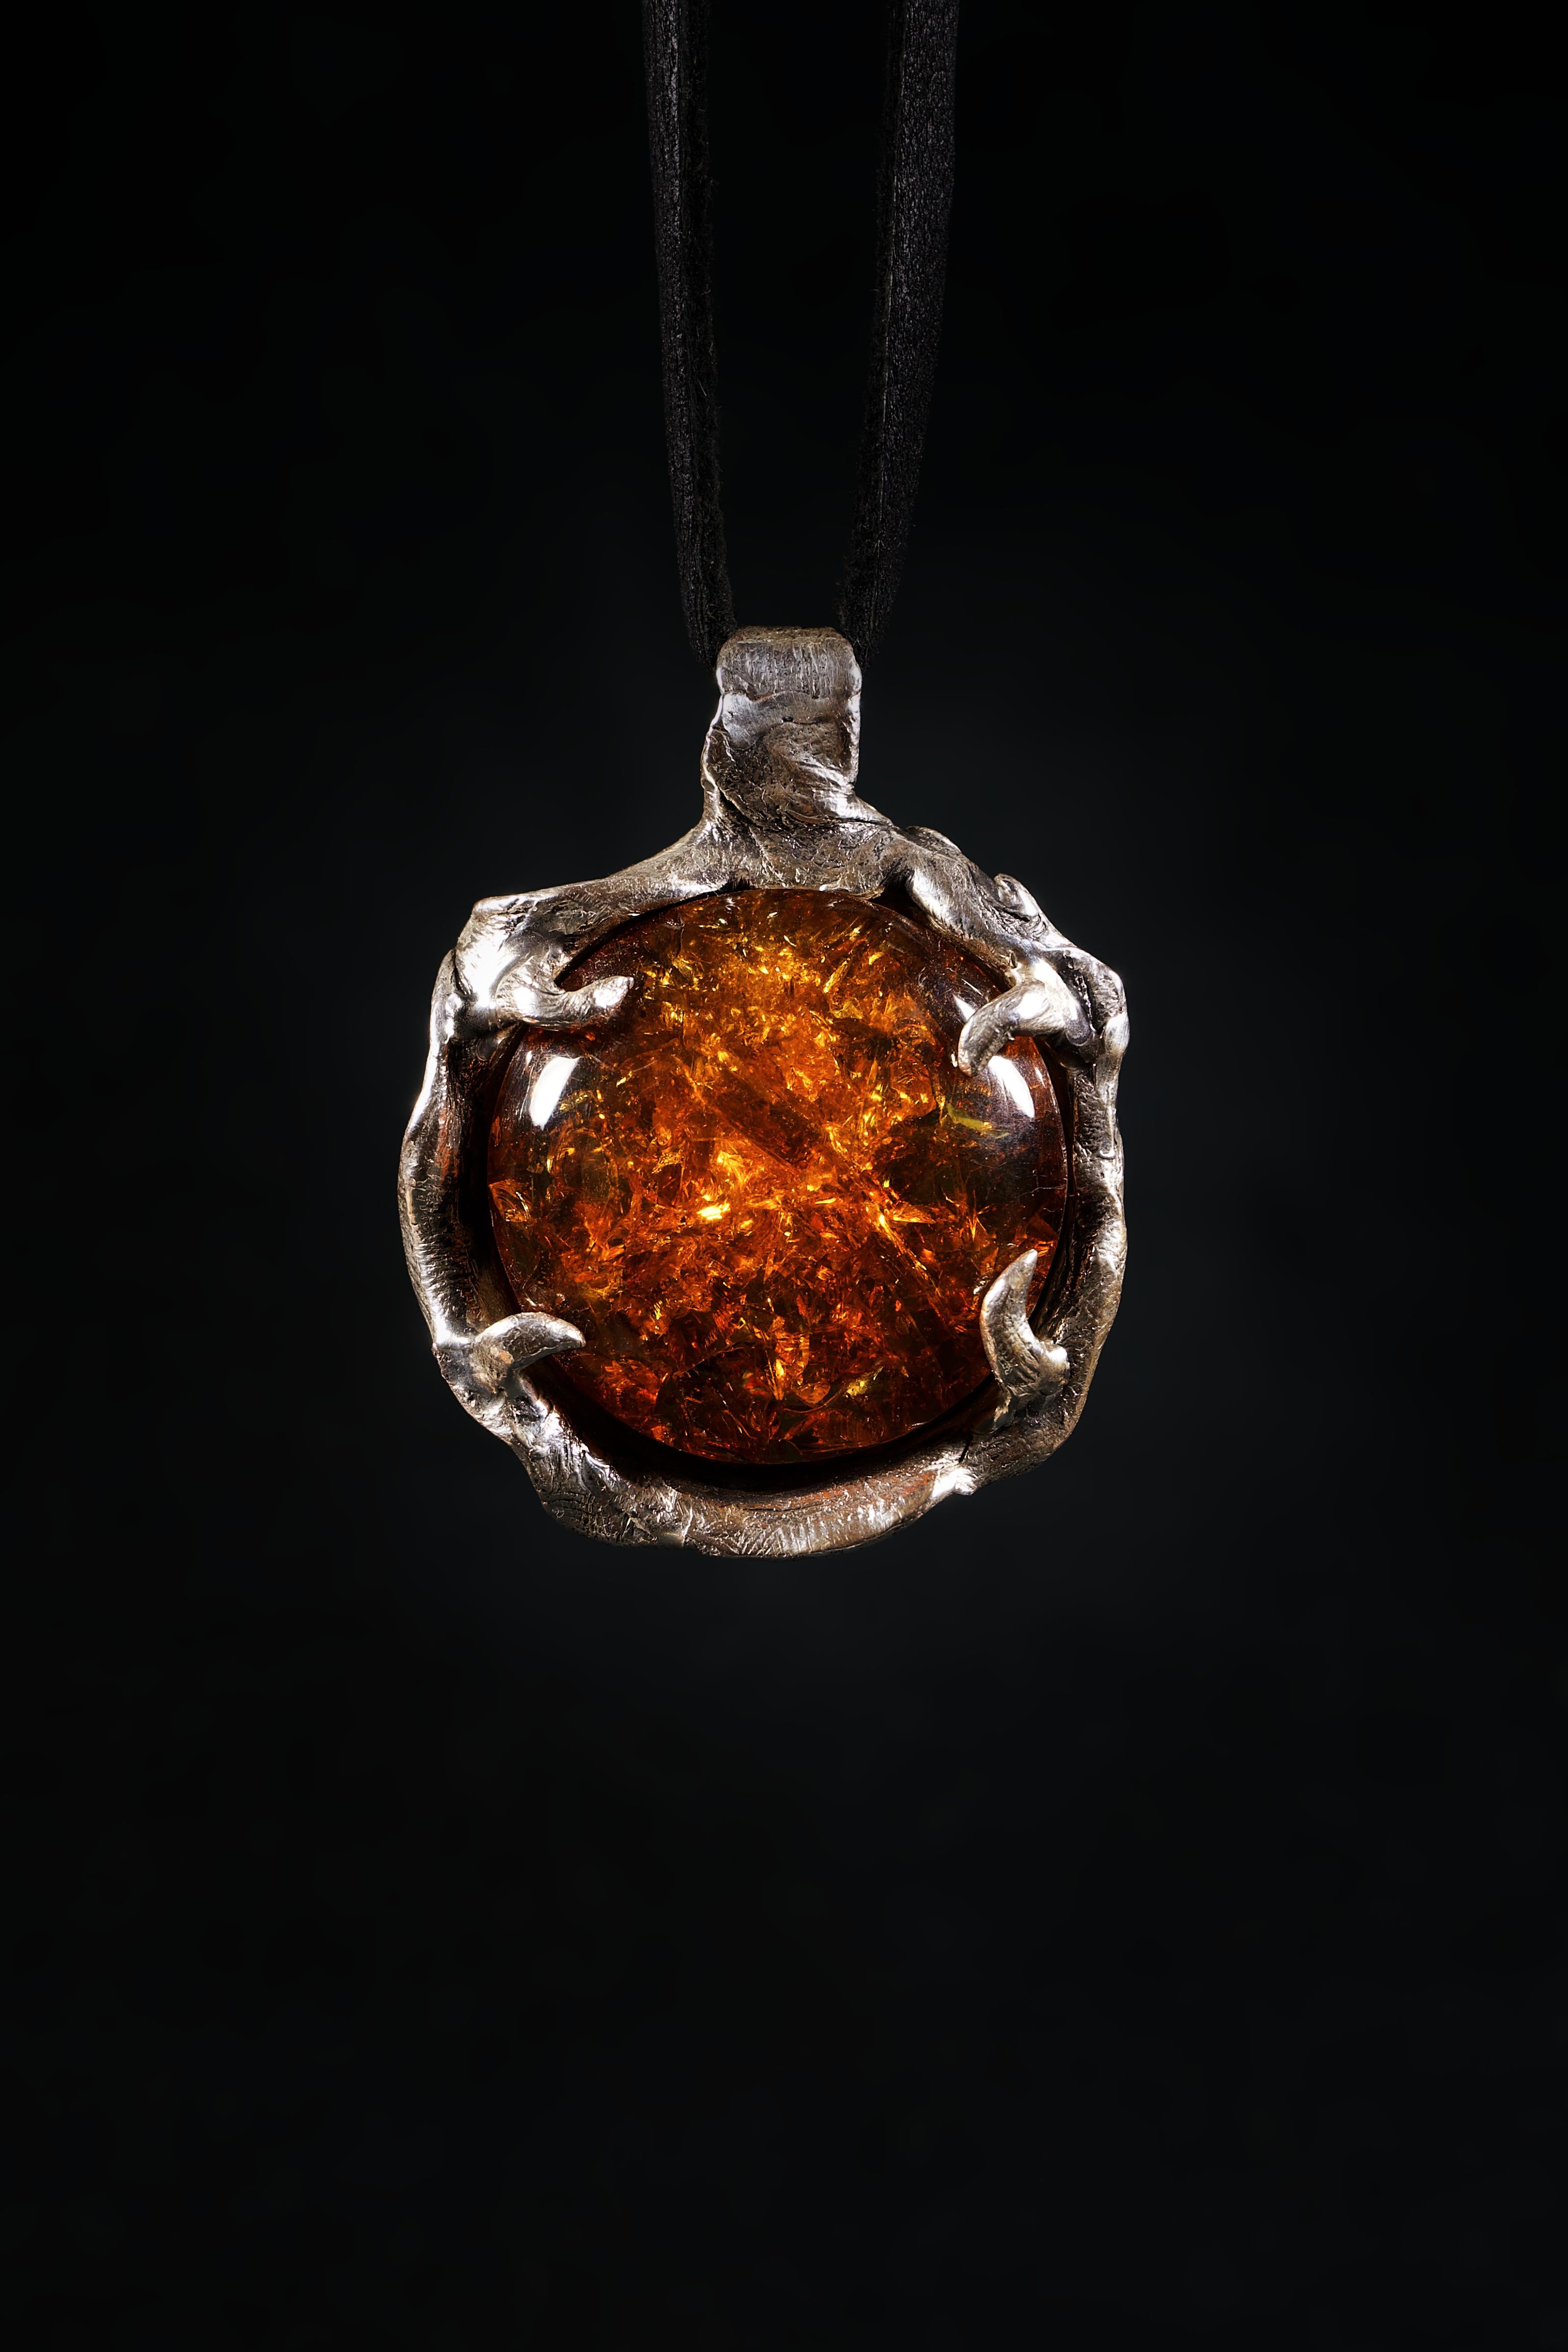 This pendant is a one-of-a-kind piece by Ken Fury that is hand carved and cast in sterling silver with a natural Mexican amber stone.

Stones: Natural Mexican amber

Metals: Sterling silver.

Hand-signed.

Size of piece: 54mm x 40mm

Size of stone: